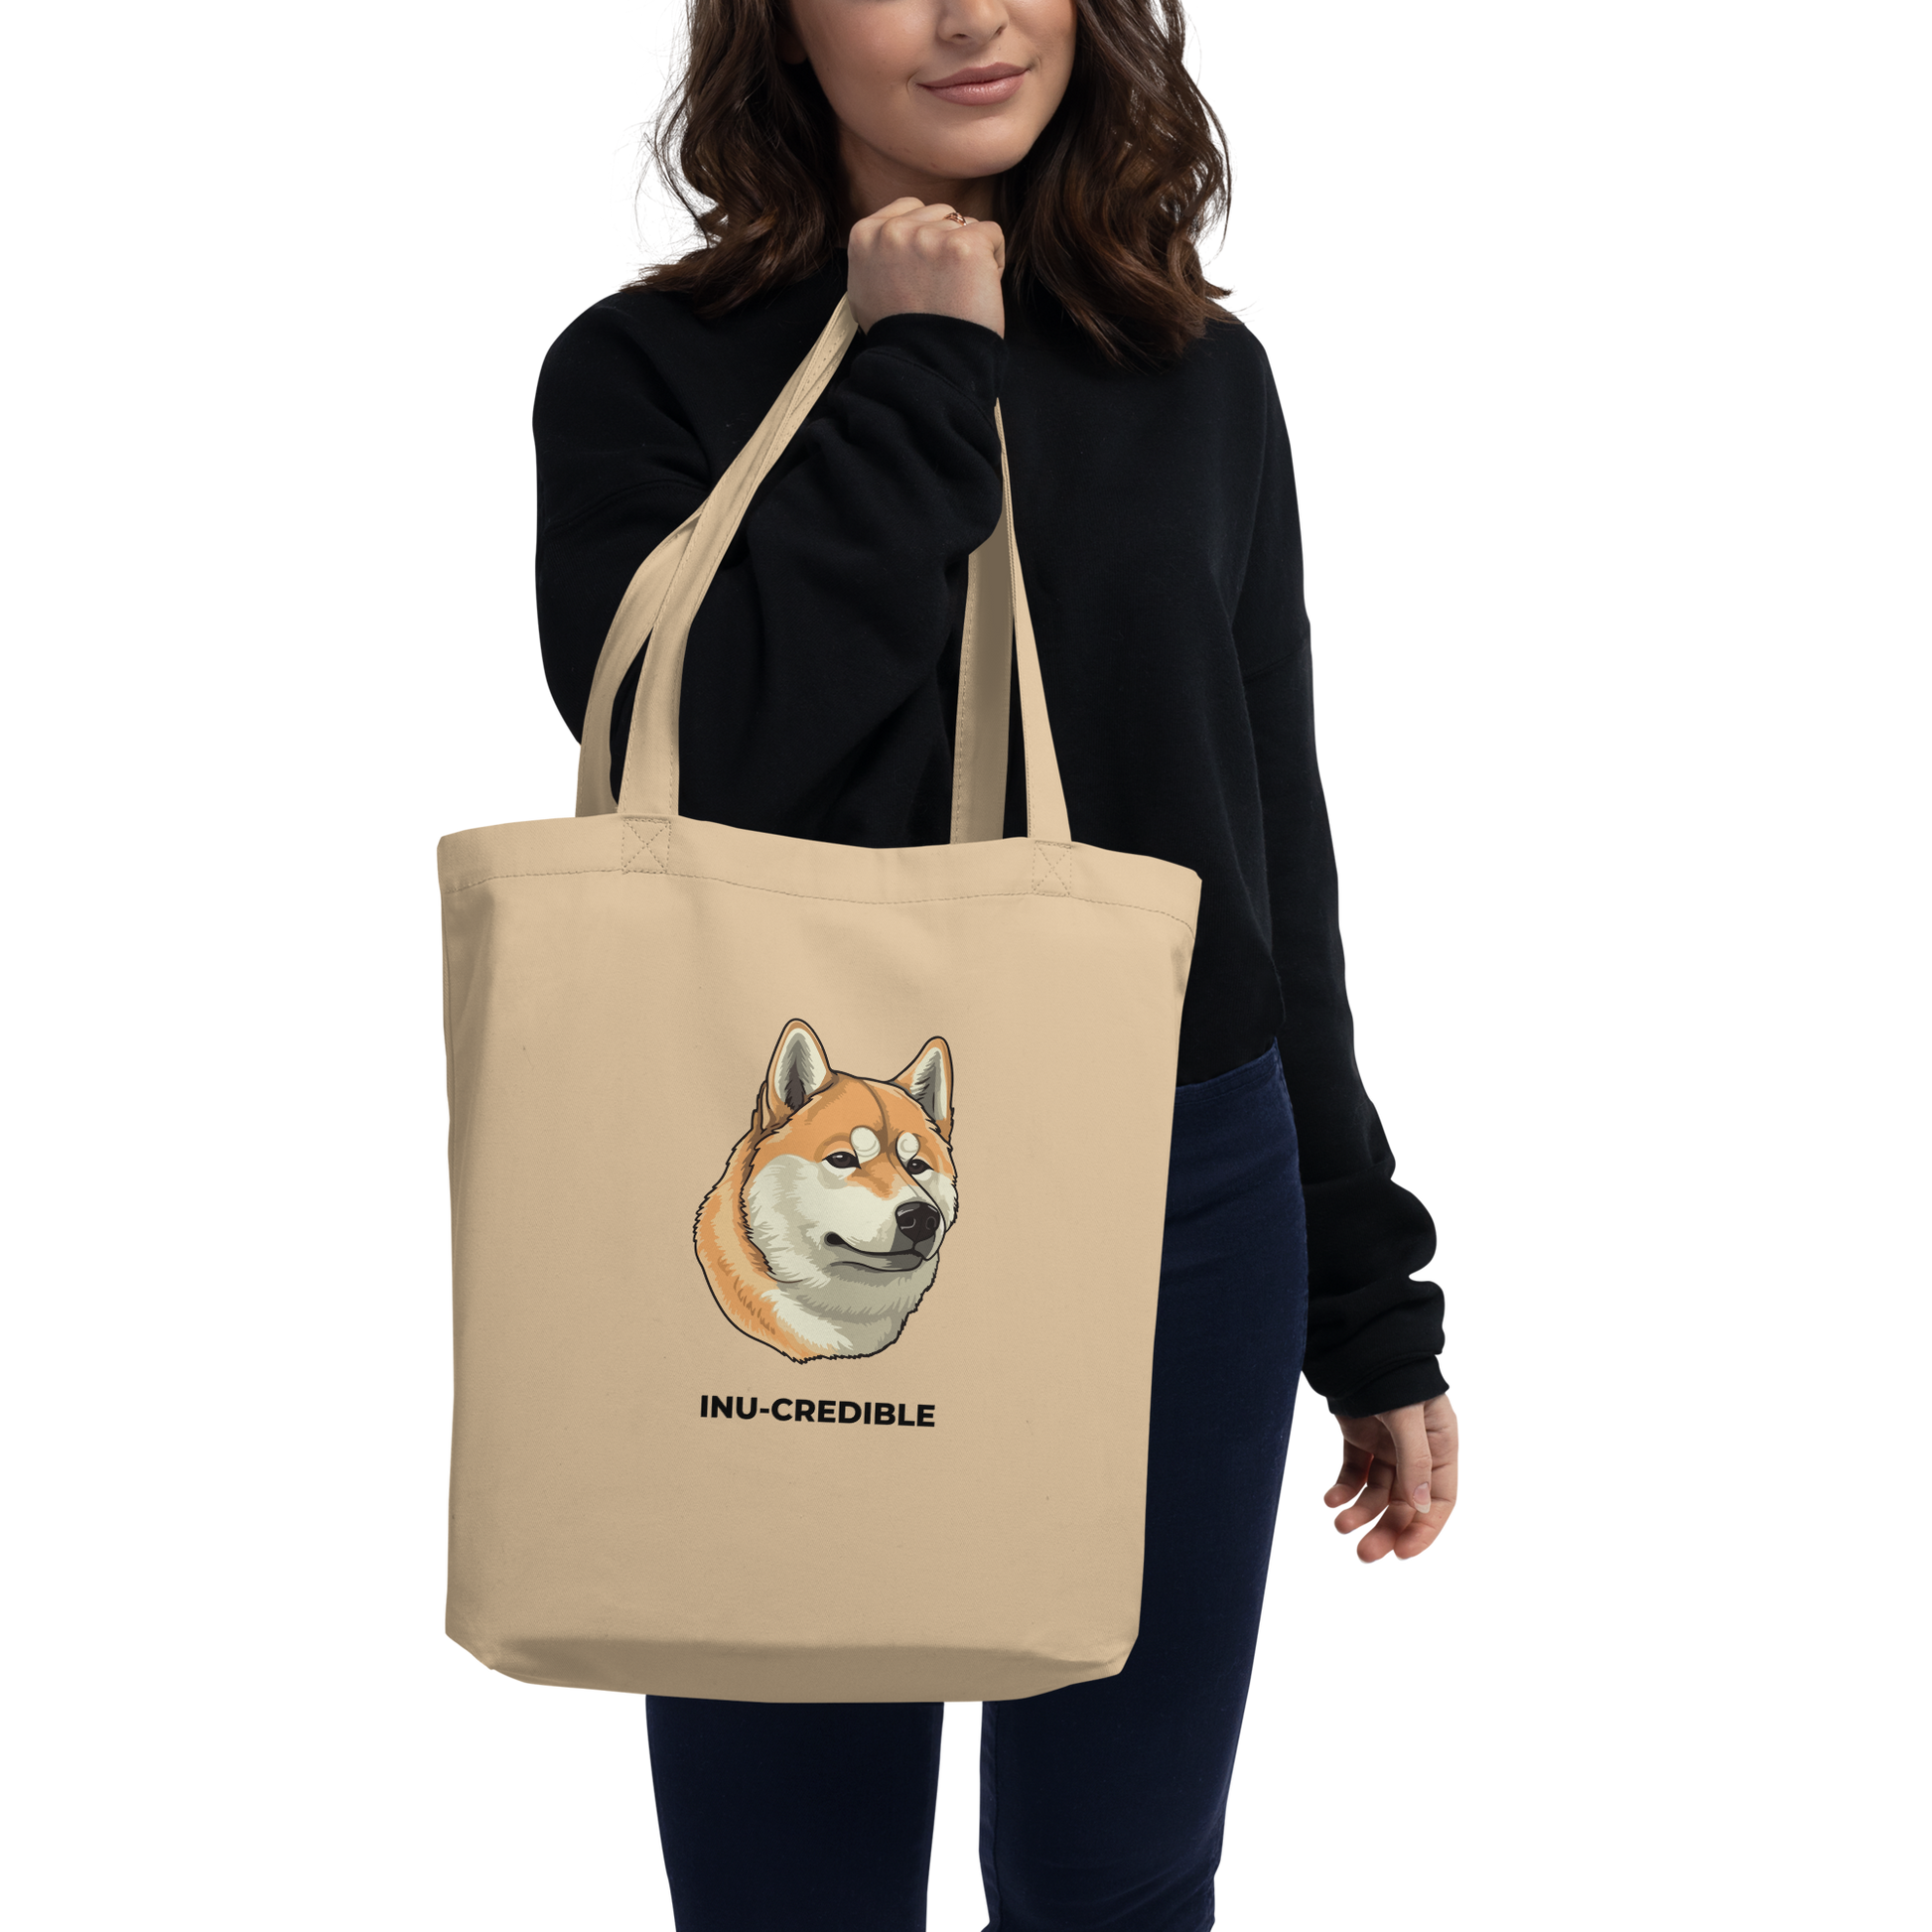 Woman carrying a Oyster Colored Shiba Inu Eco Tote Bag featuring the Inu-Credible graphic - Shop Tote Bags Online - Boozy Fox